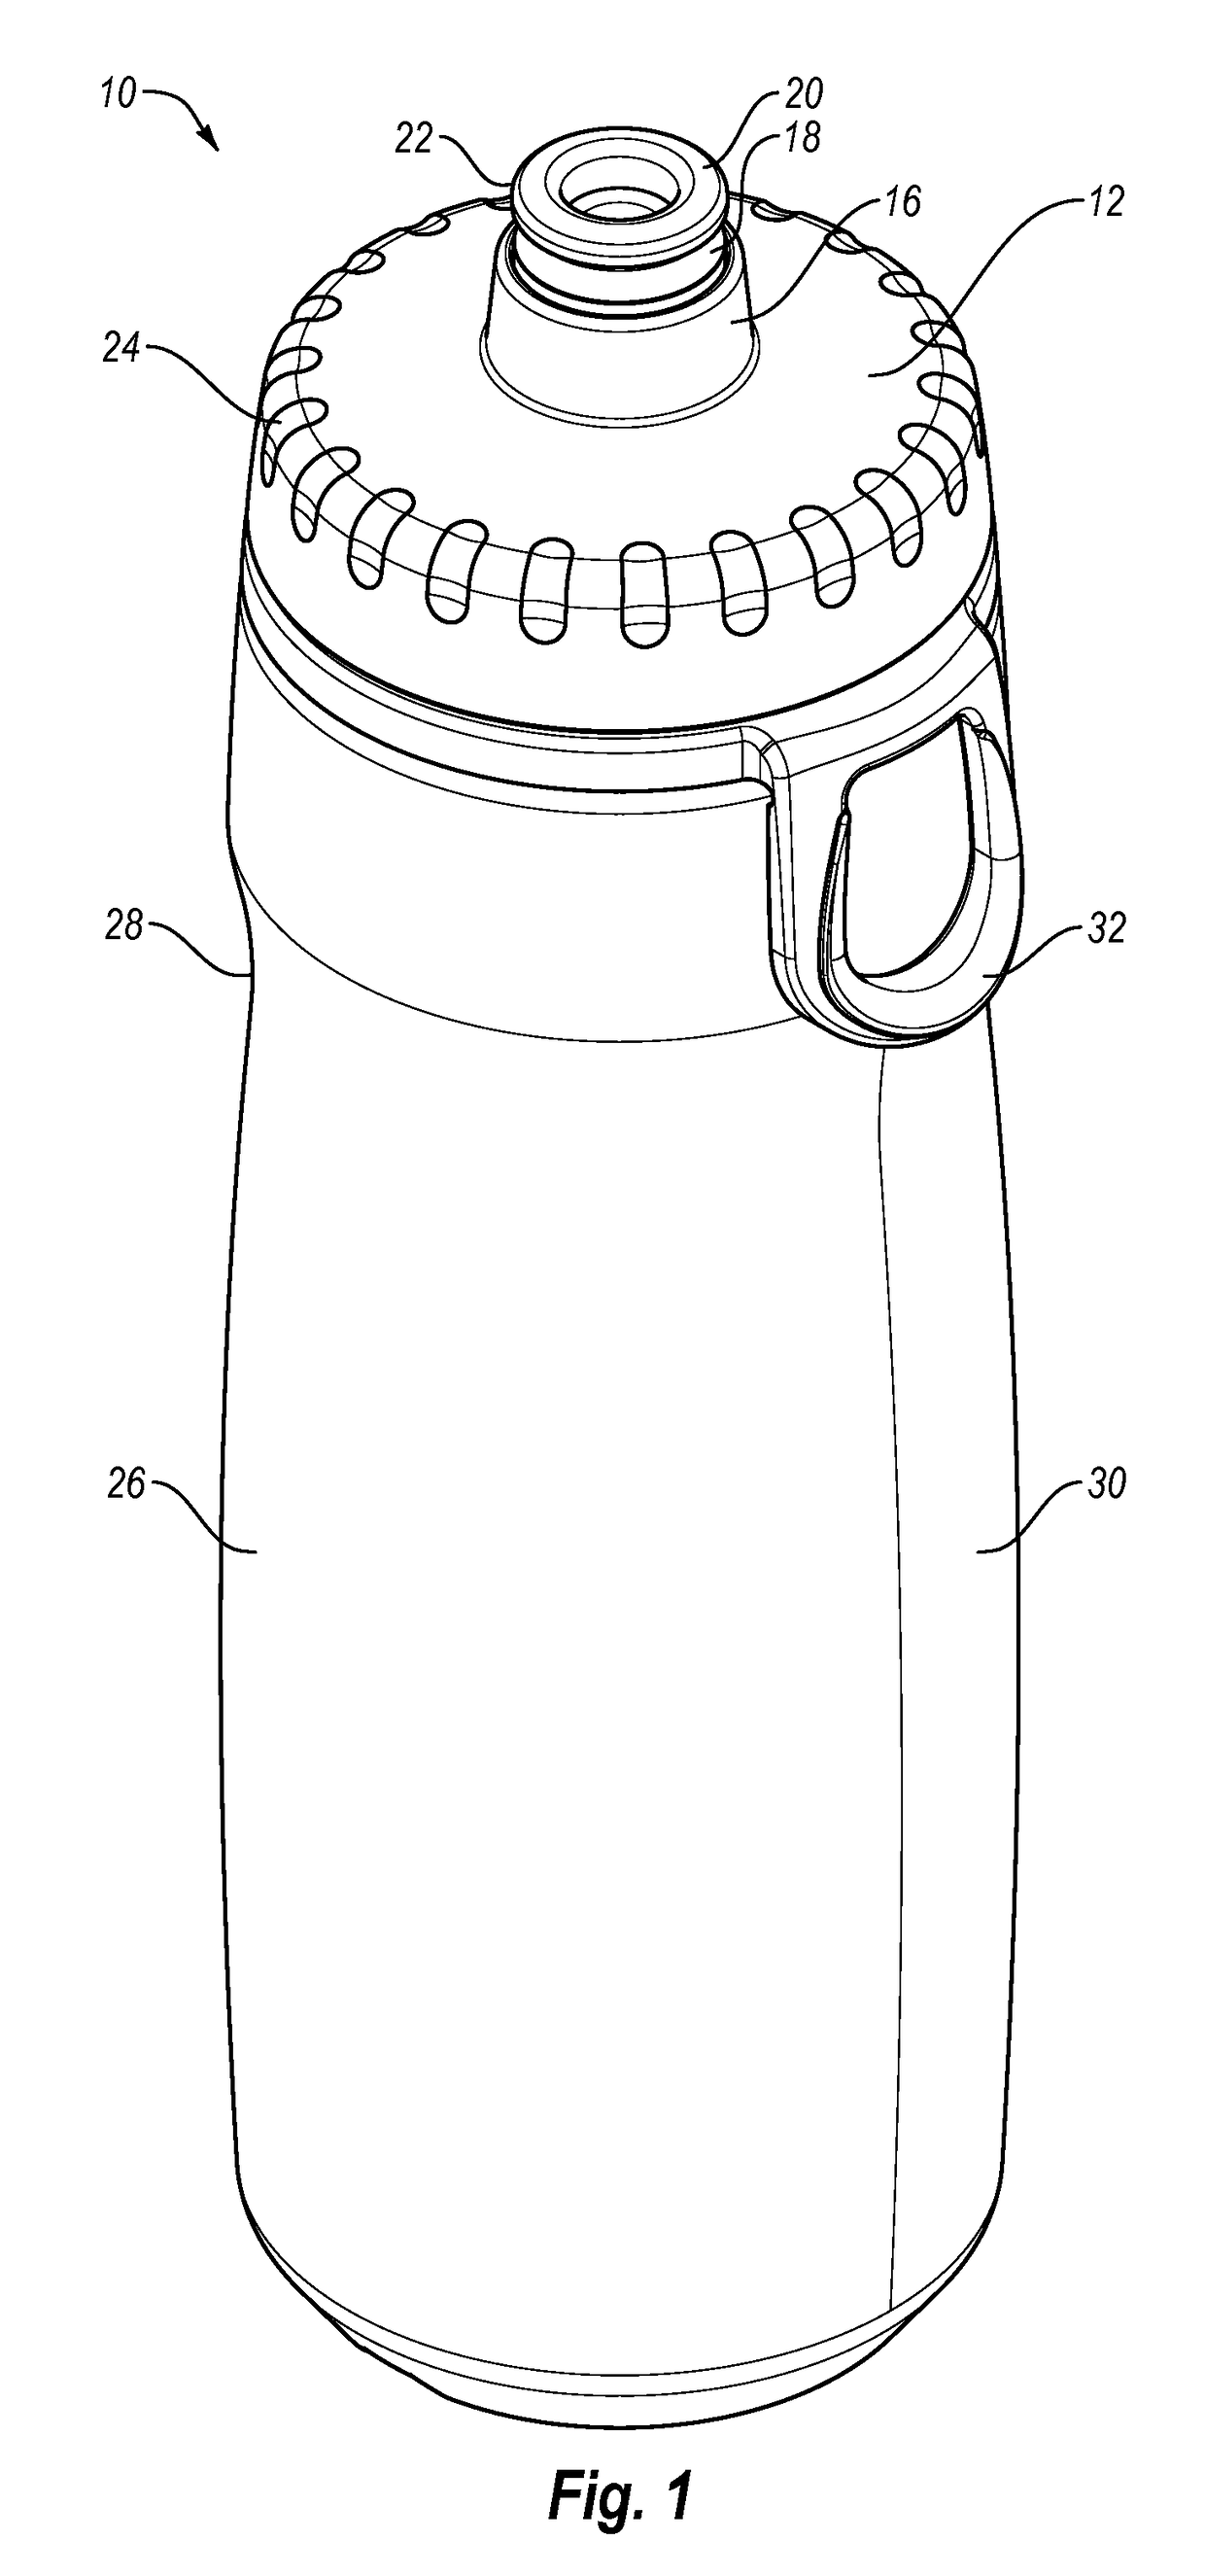 Liquid dispensing container with multi-position valve and straw